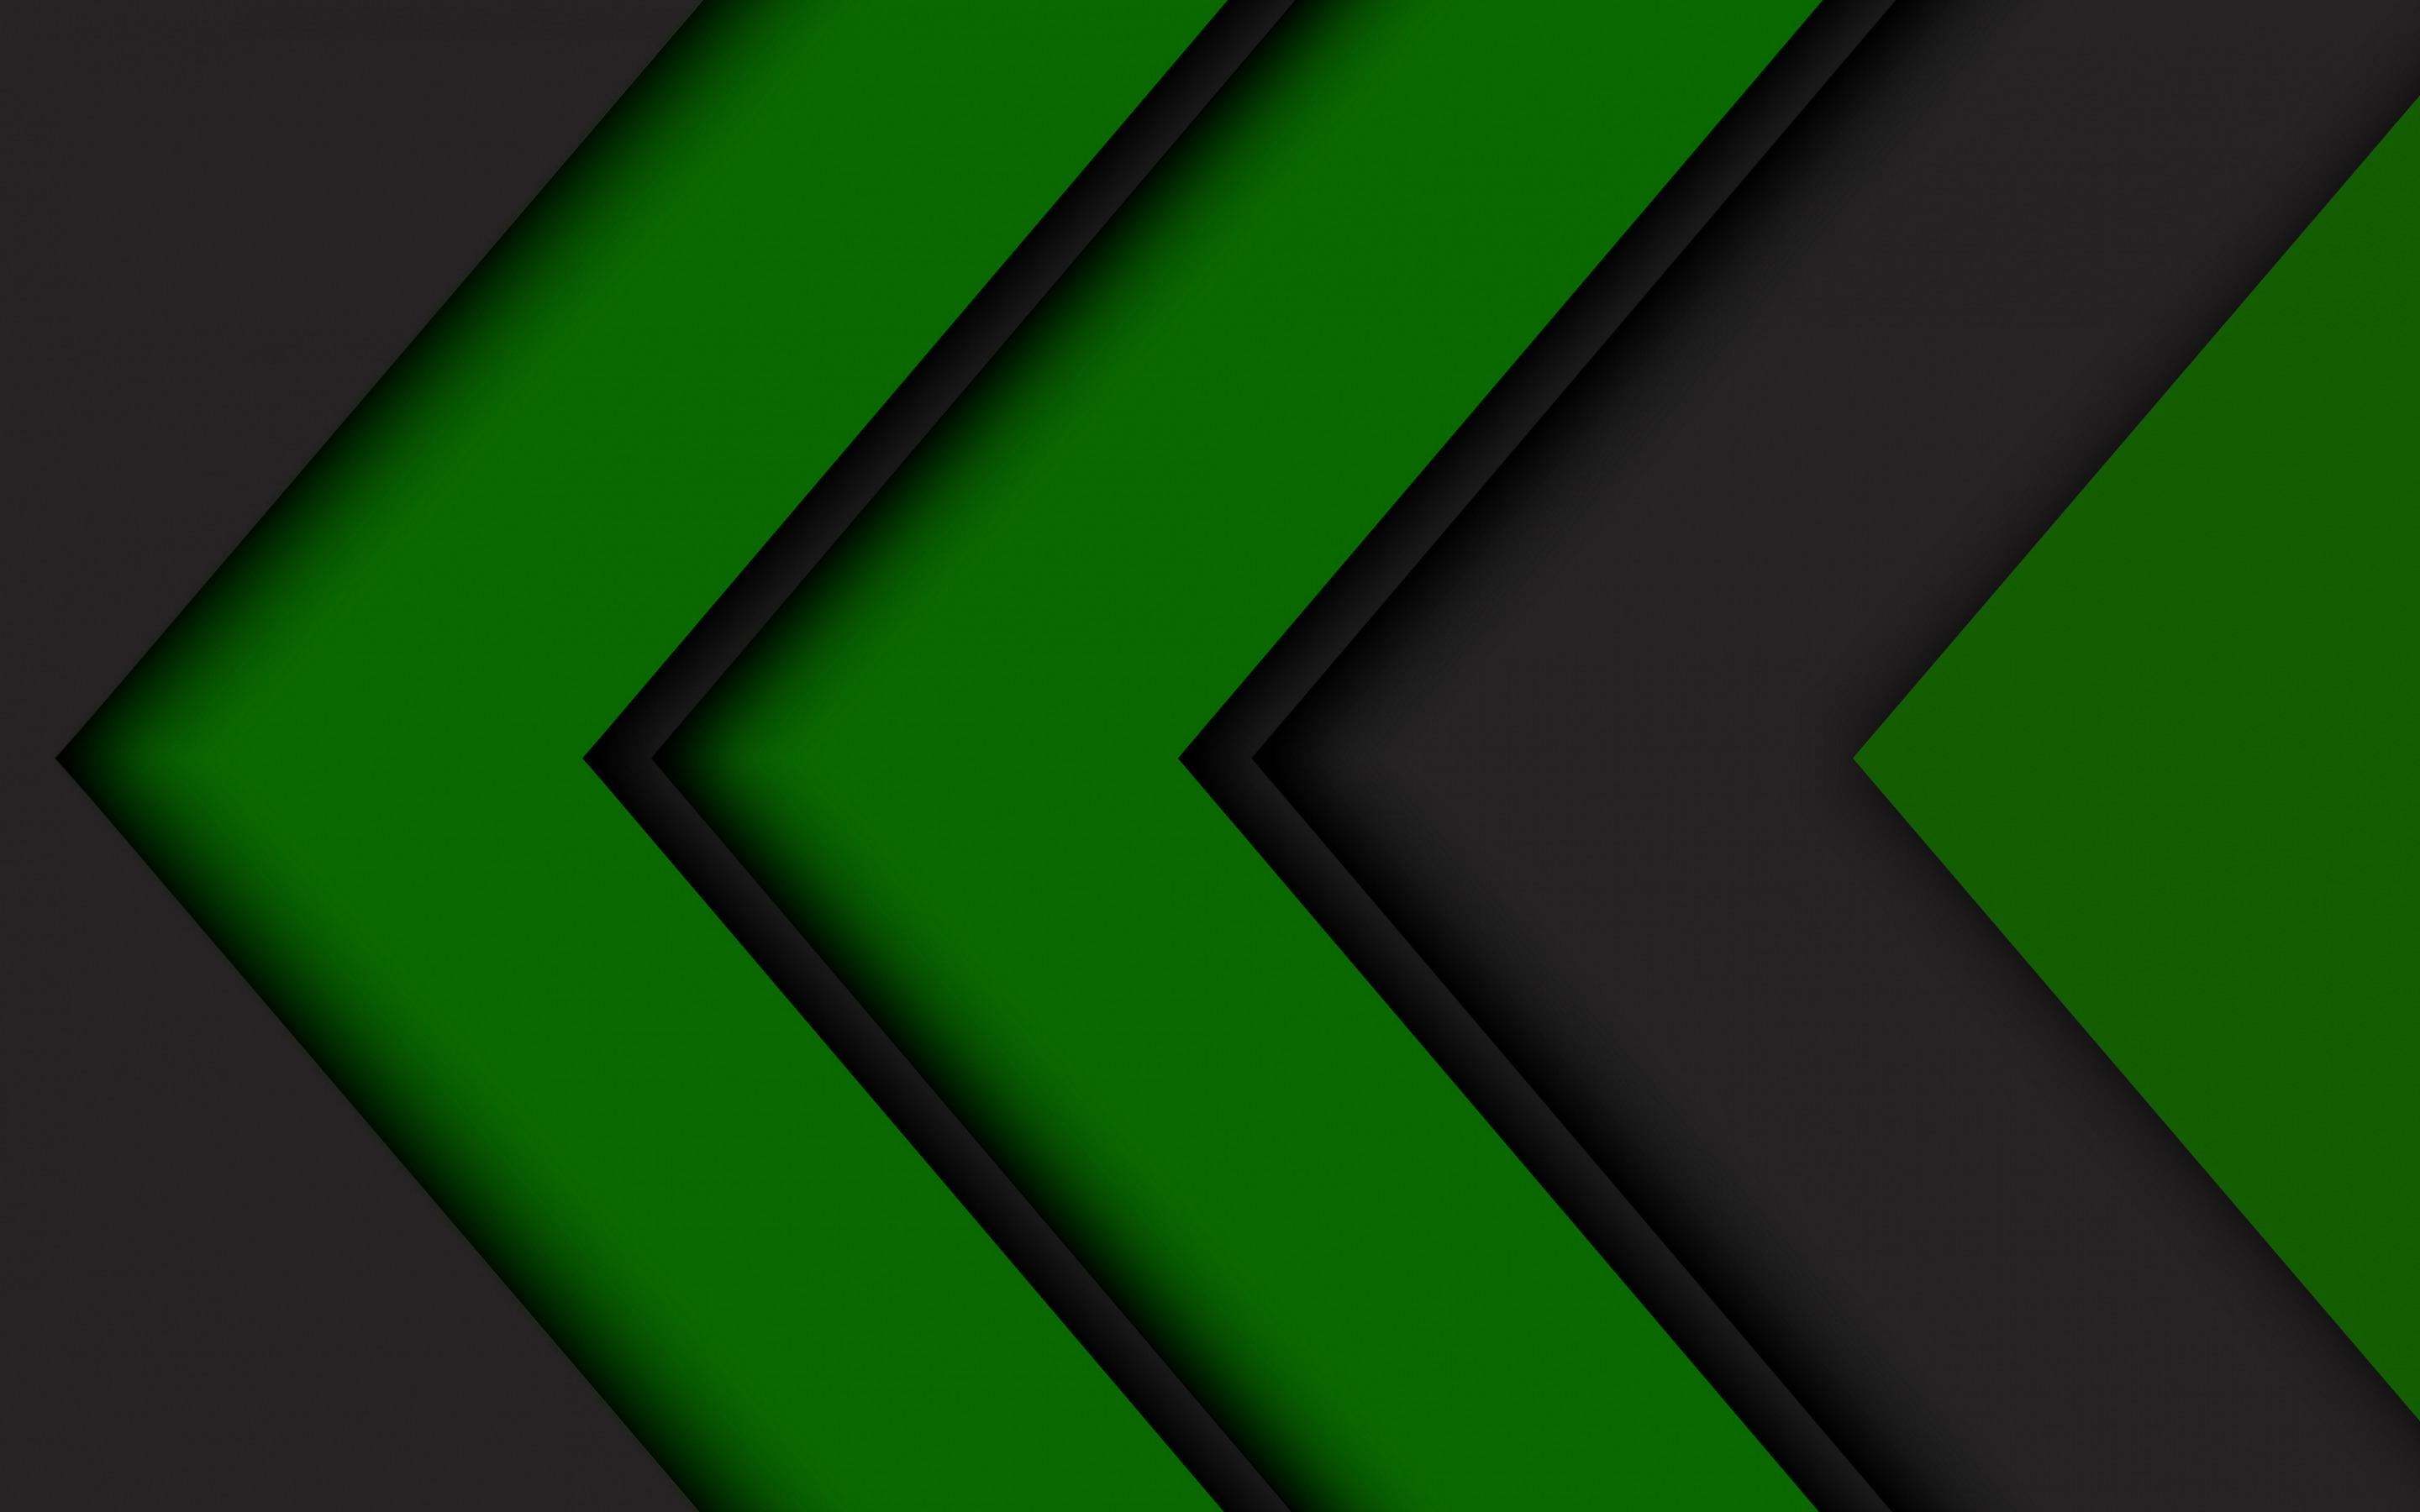 Black Green Abstract Background, Material Design, Black - Green Abstract Background Design - HD Wallpaper 